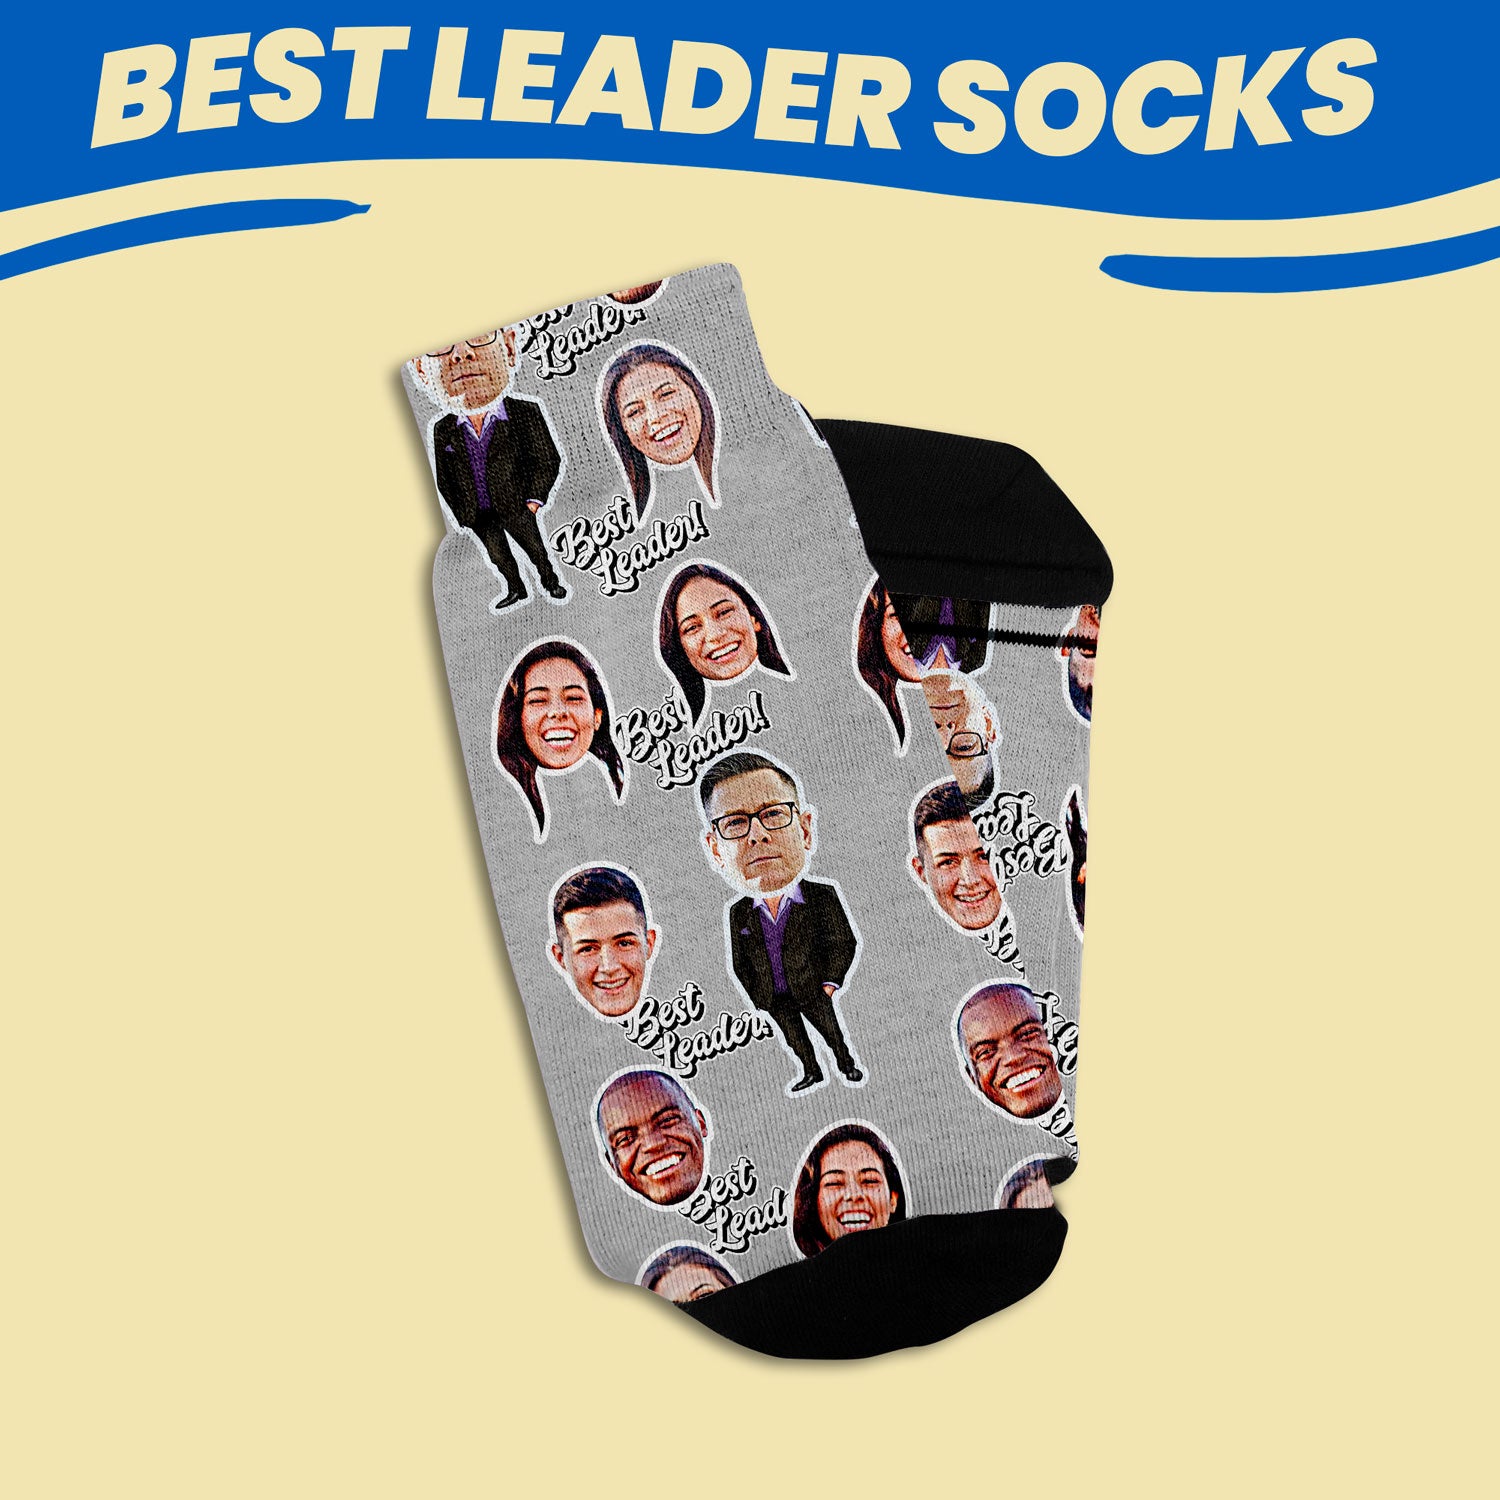 best leader boss day gift socks personalized with faces of coworkers